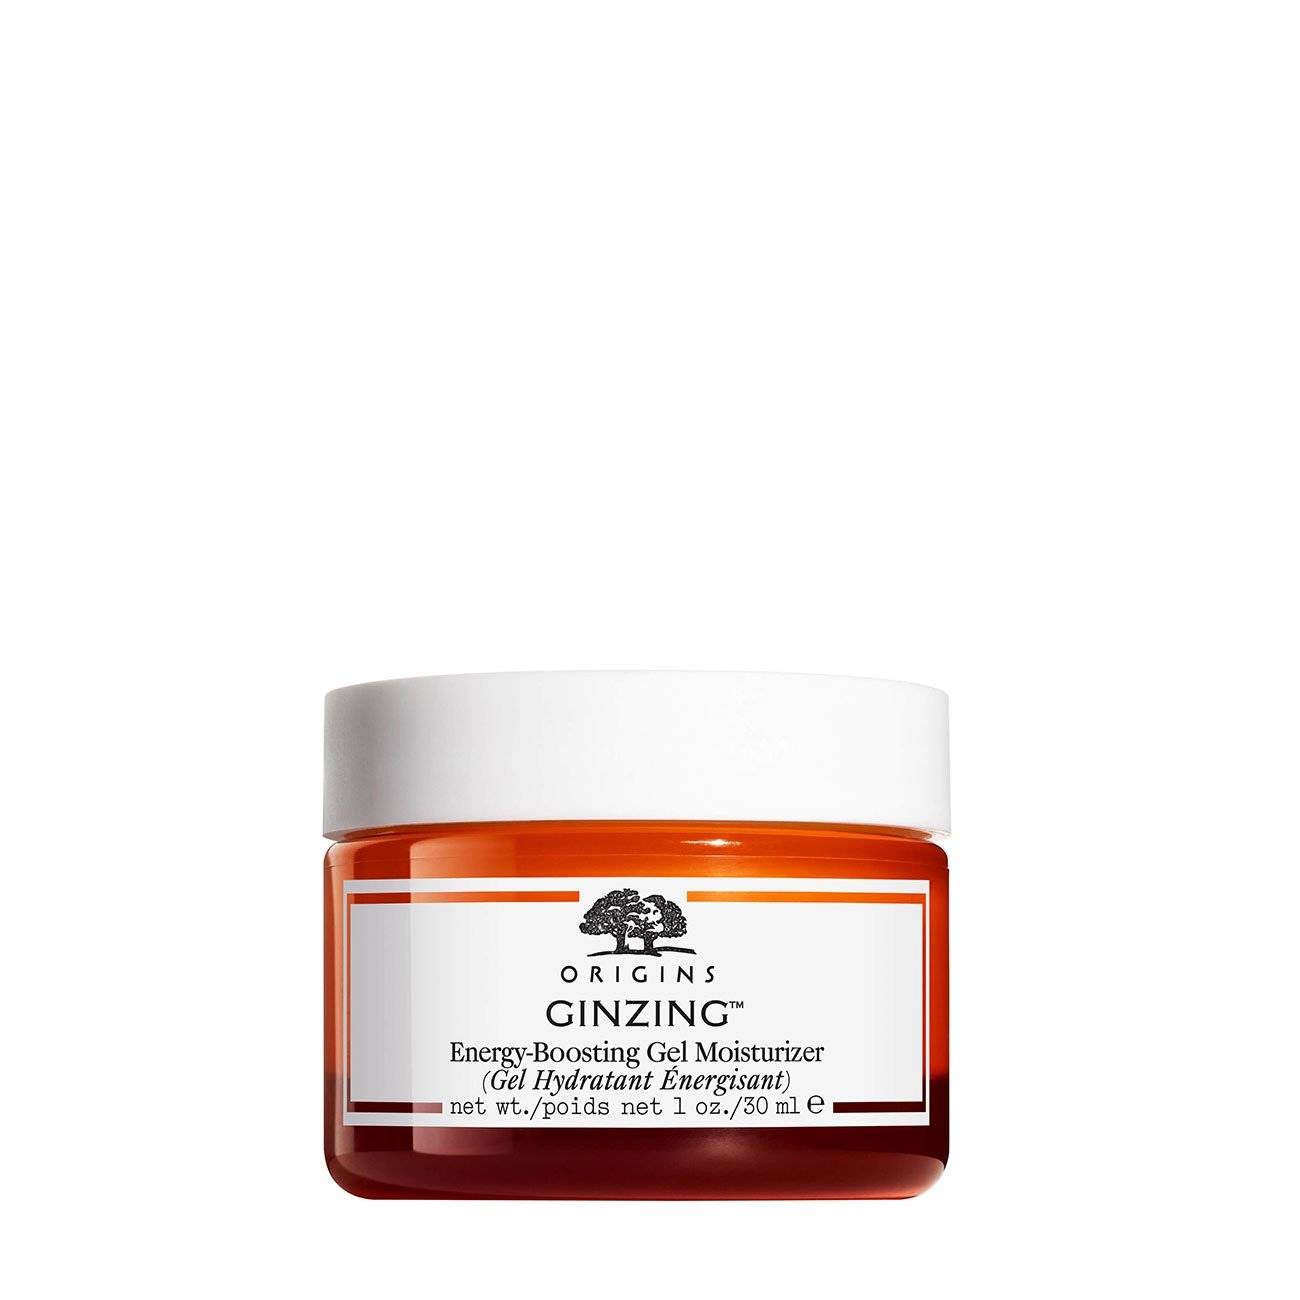 GINZING ENERGY-BOOSTING GEL MOISTURIZER WITH GINSENG AND COFFEE 30 ml AND